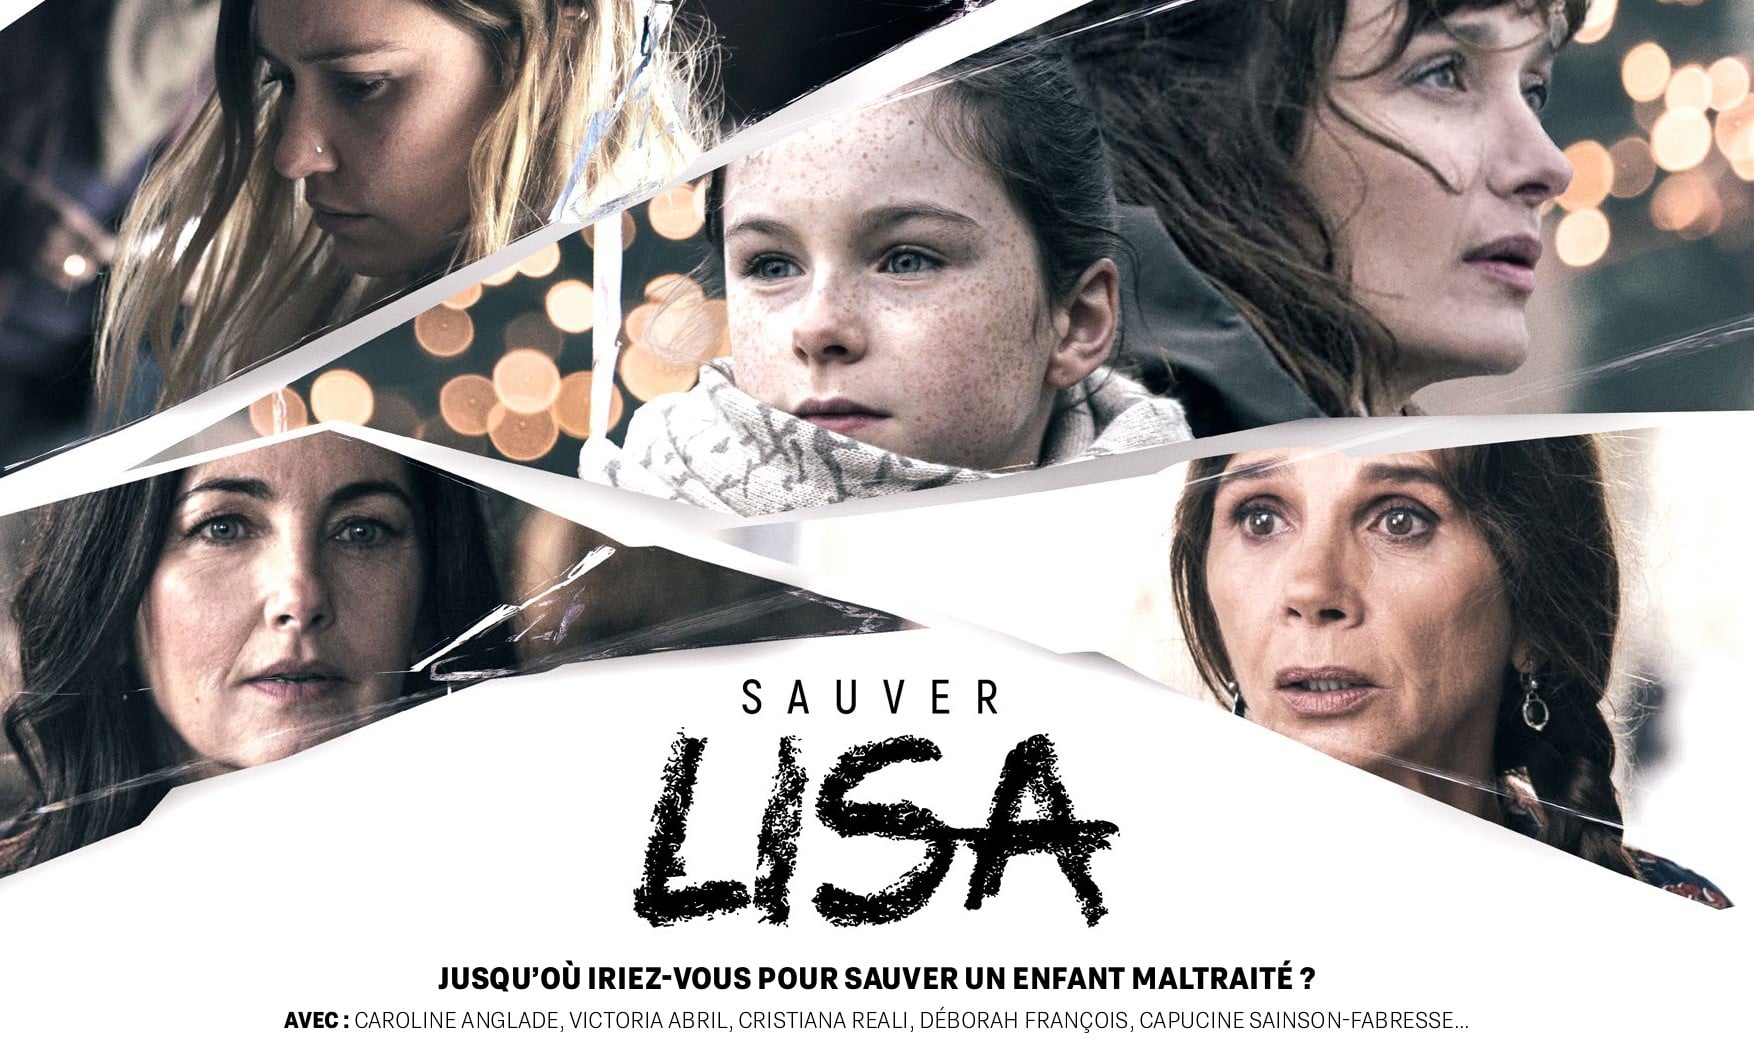 Broadcast of Sauver Lisa, from November 16 on M6